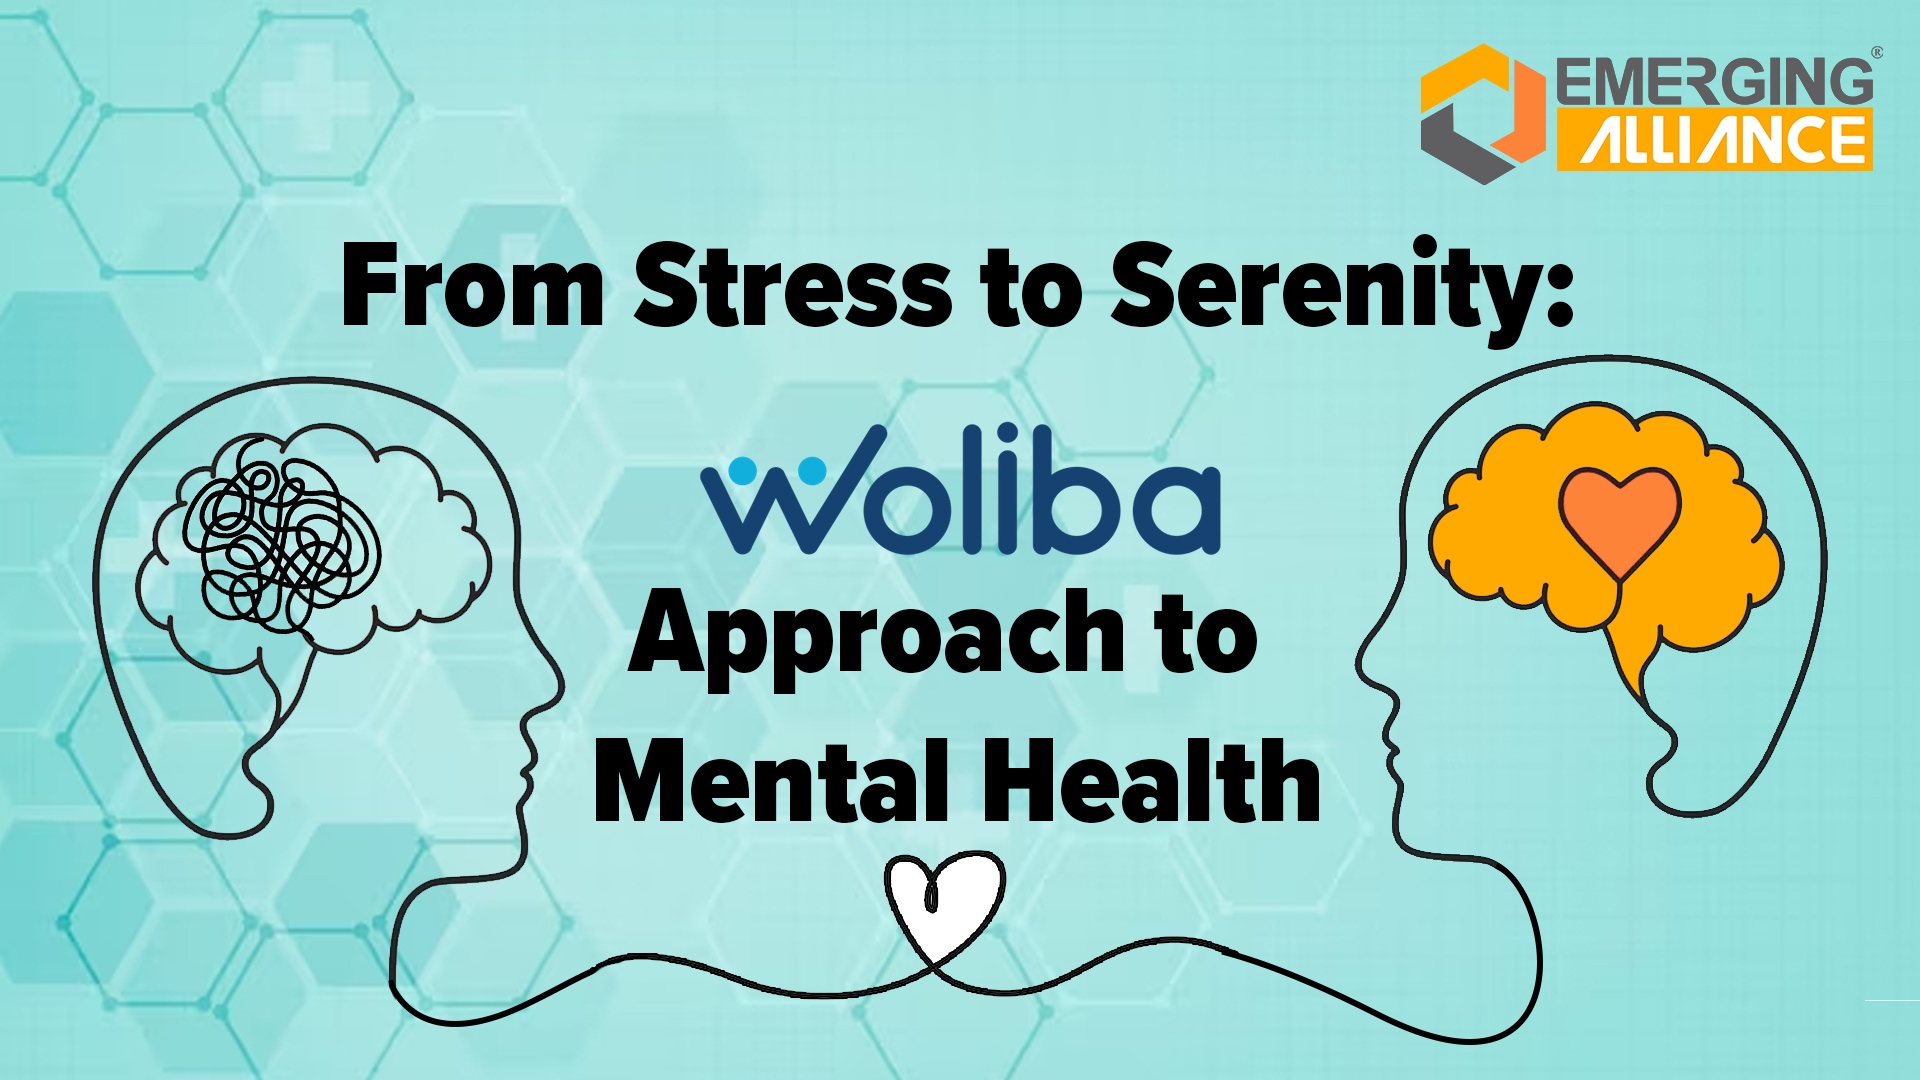 Woliba approach to mental health